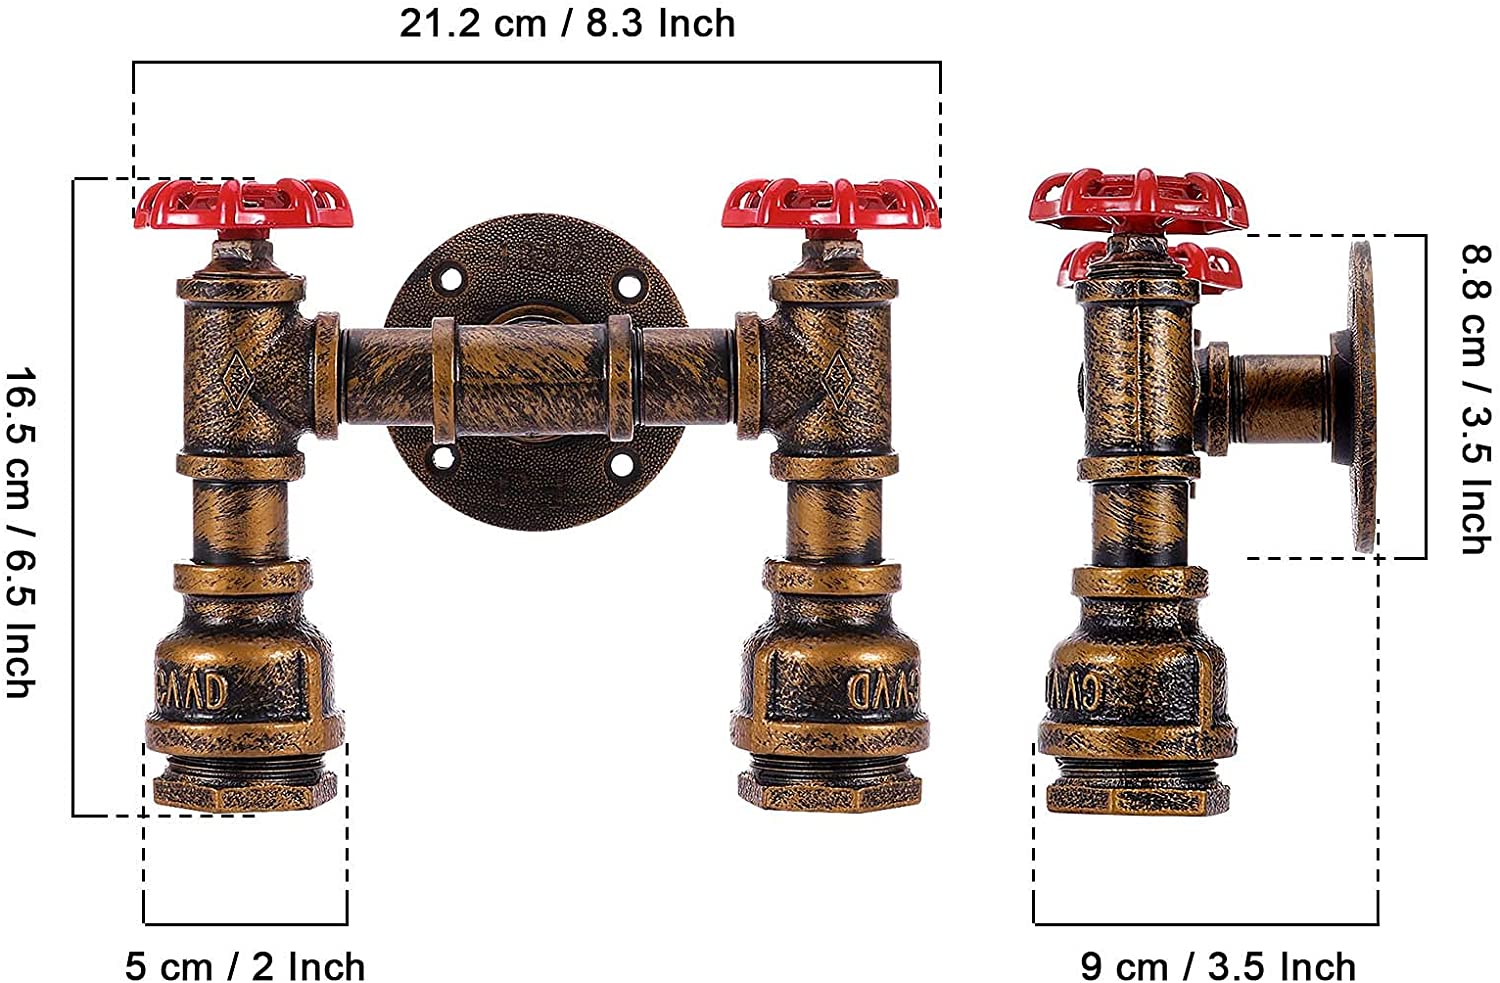 2 light water pipe wall sconce retro steampunk wall light fixture